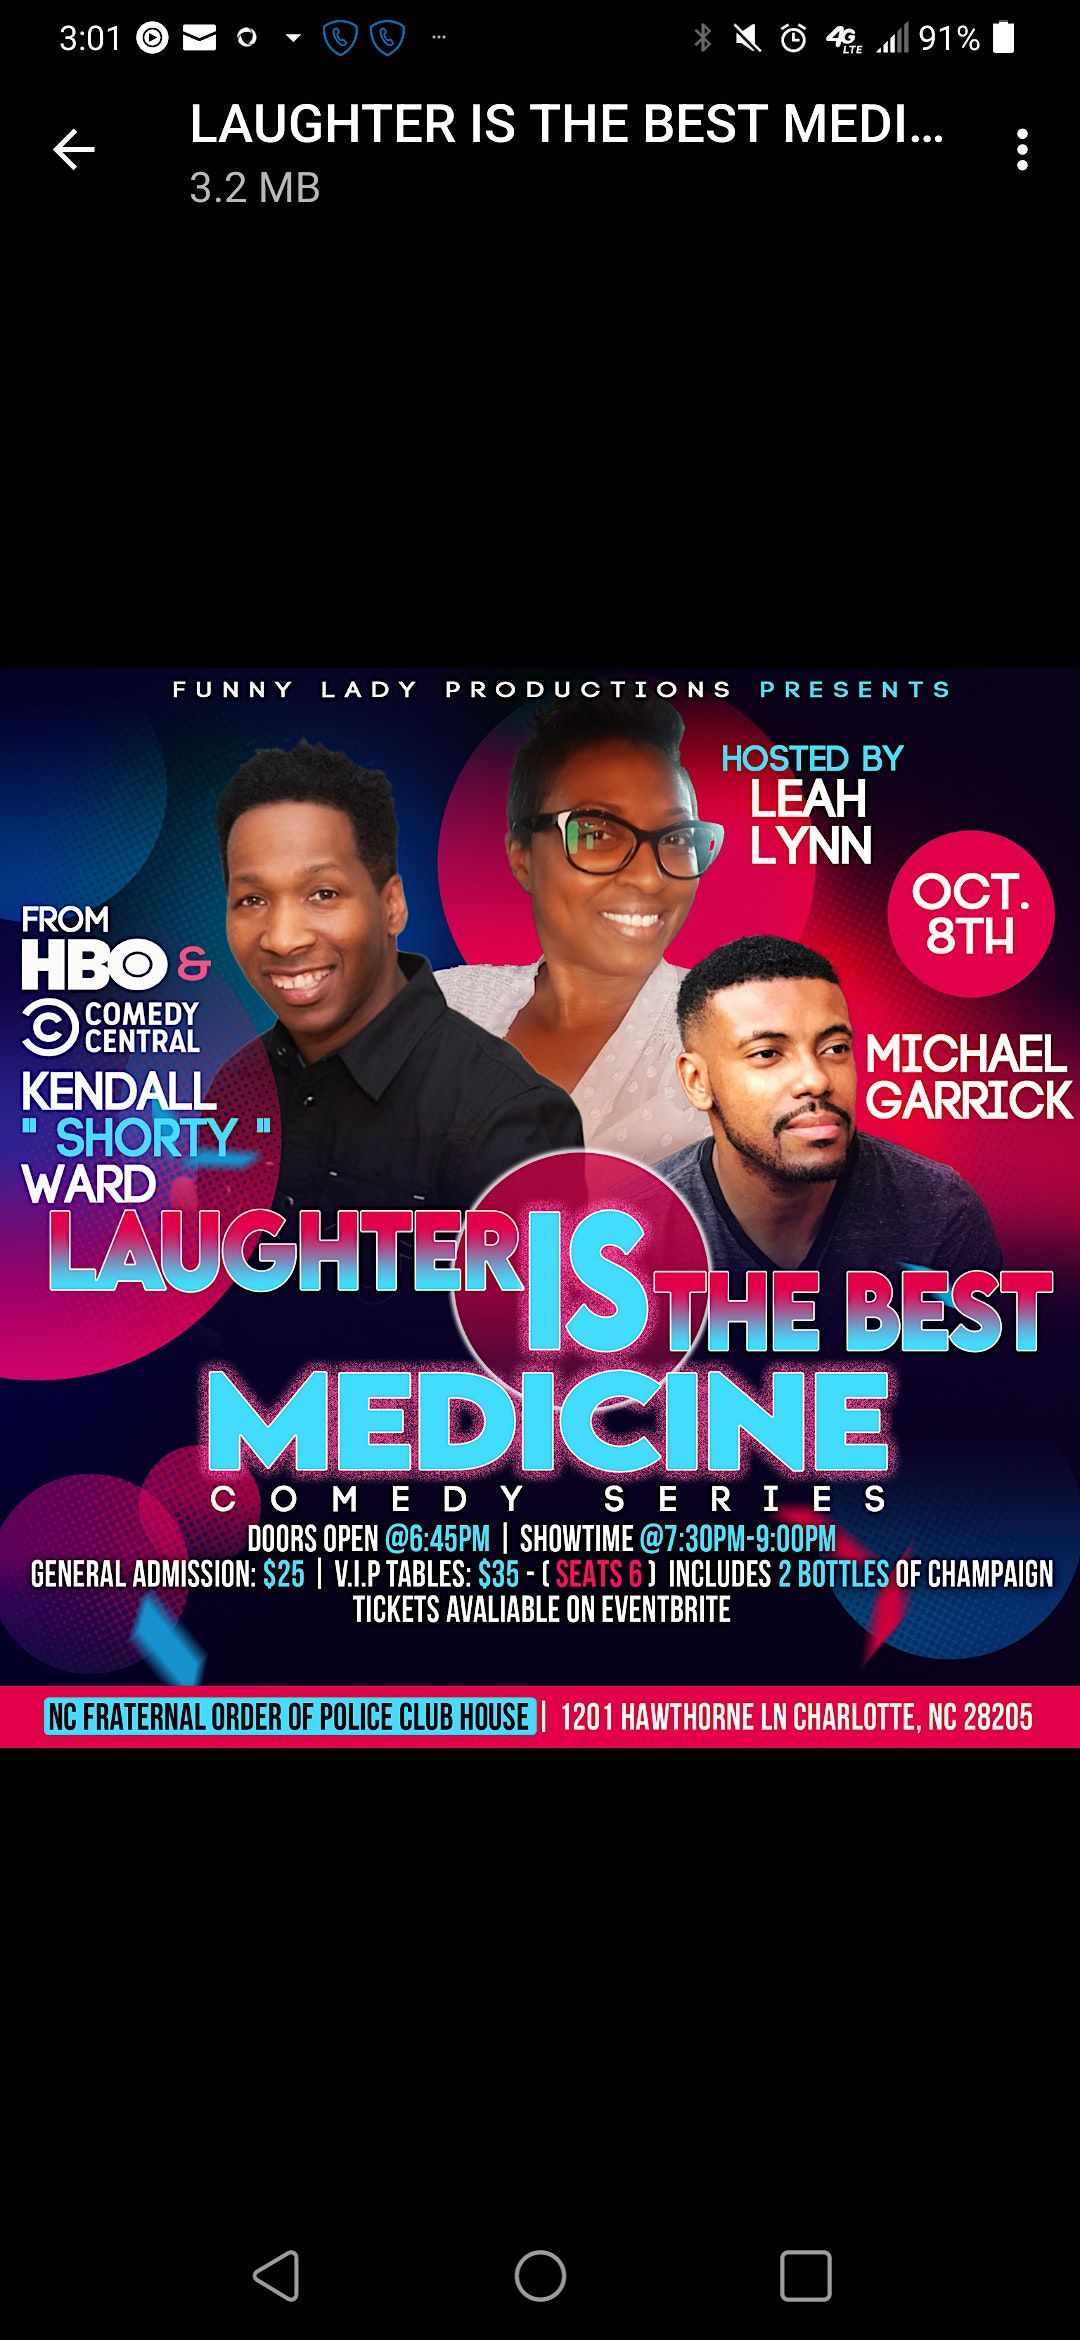 LAUGHTER IS THE BEST MEDICINE COMEDY Series